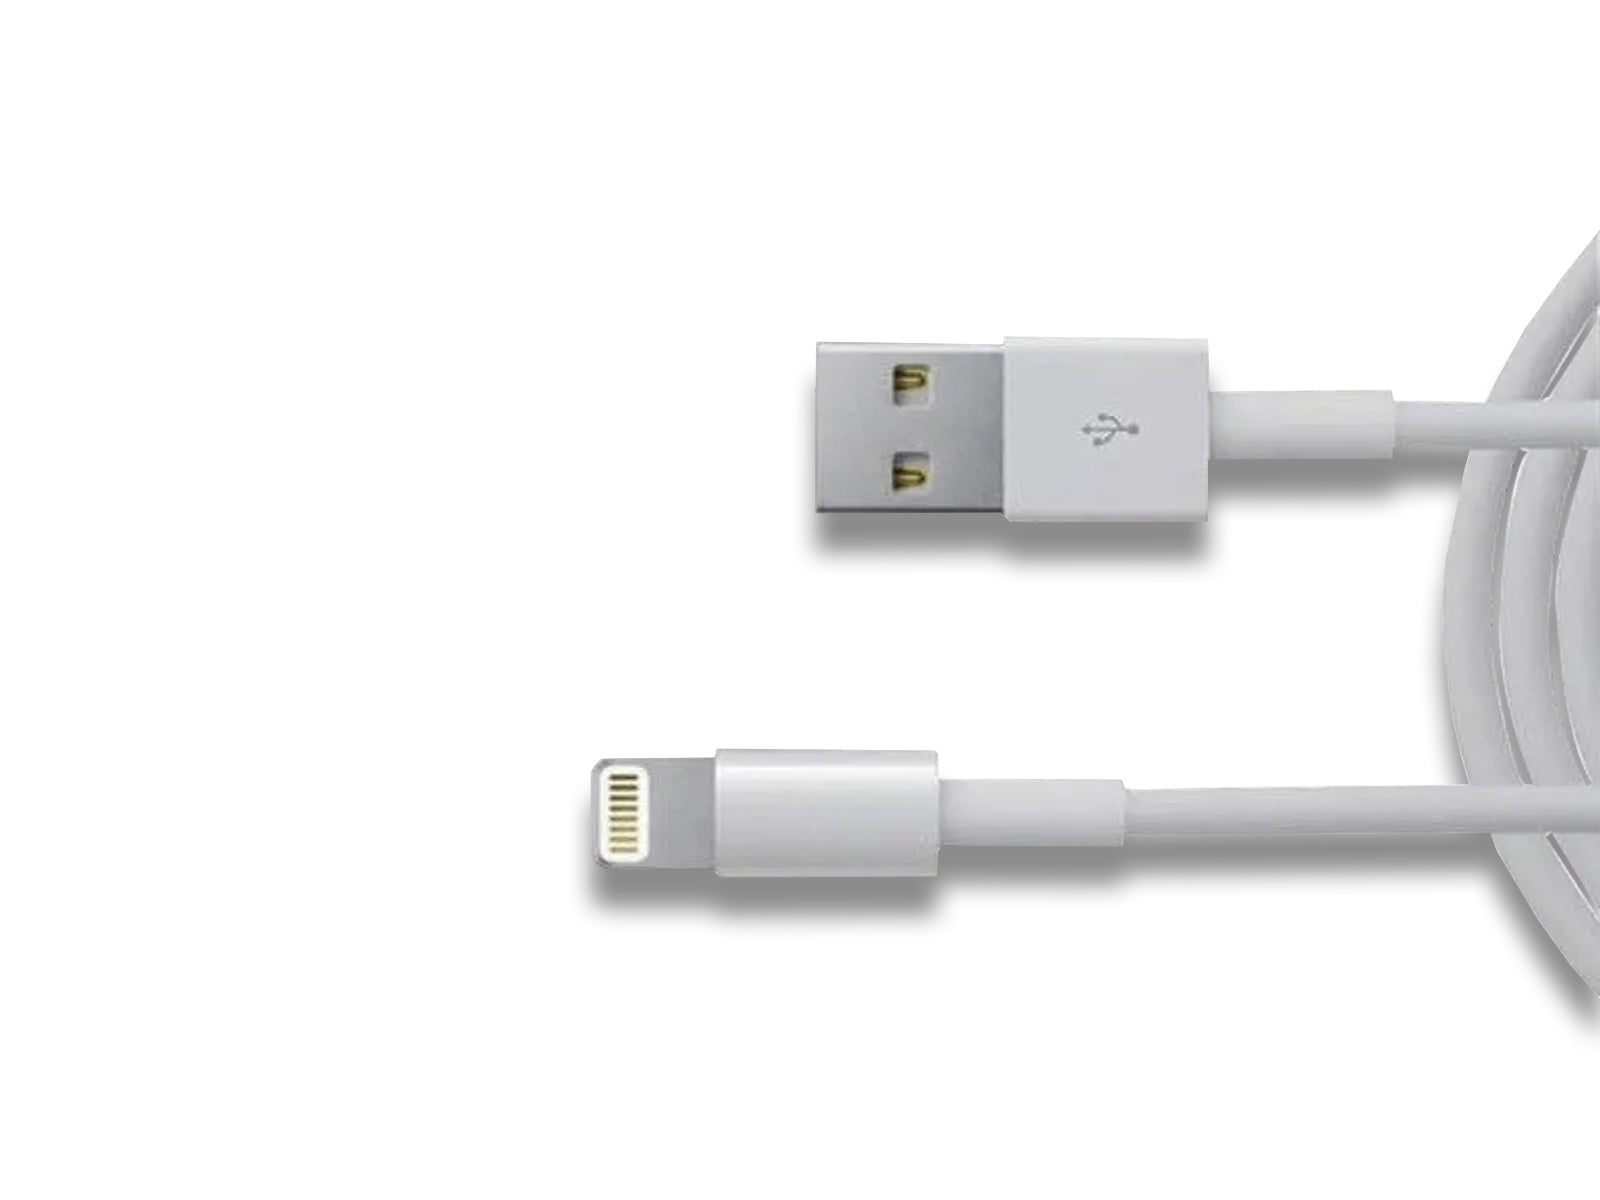 Apple Lightning Cable Shows Close up View of Connectors